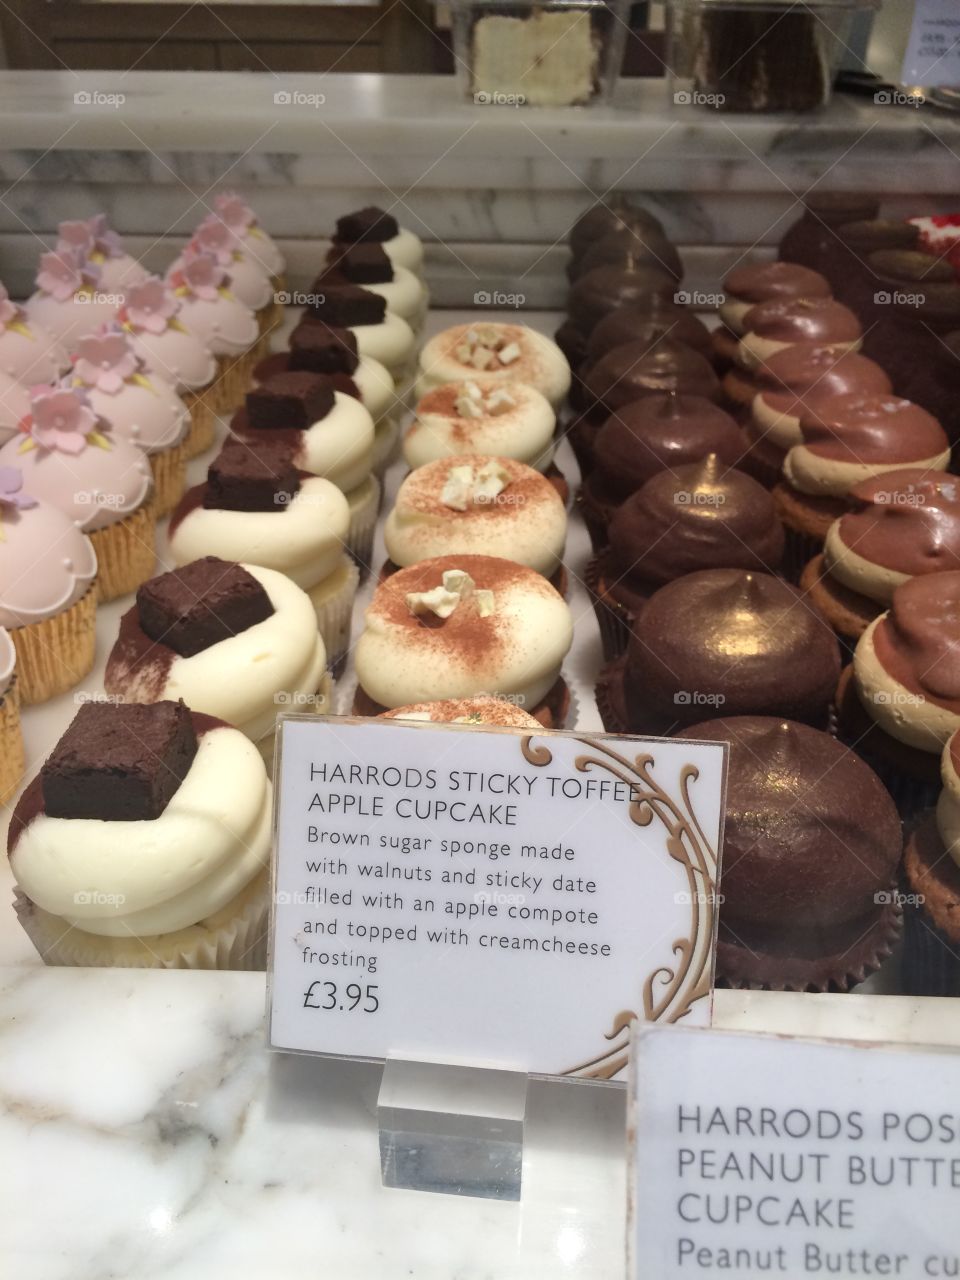 Mm.. Cupcakes. Dessert shopping in Harrod's is one of my favorite past times 